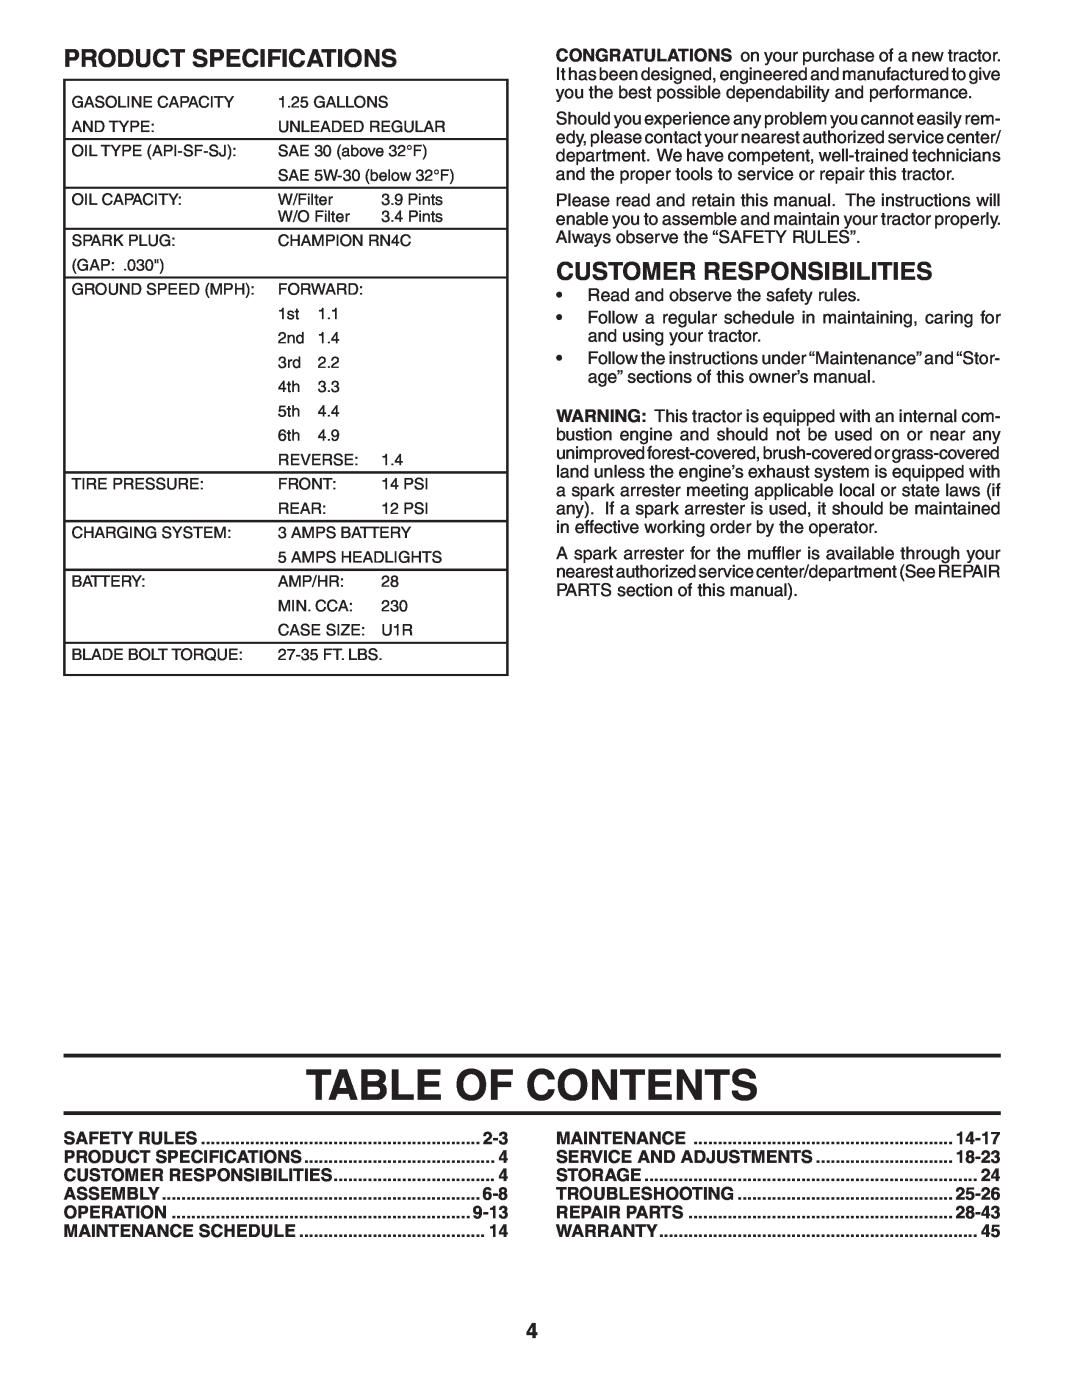 Weed Eater WE165T42A manual Table Of Contents, Product Specifications, Customer Responsibilities 